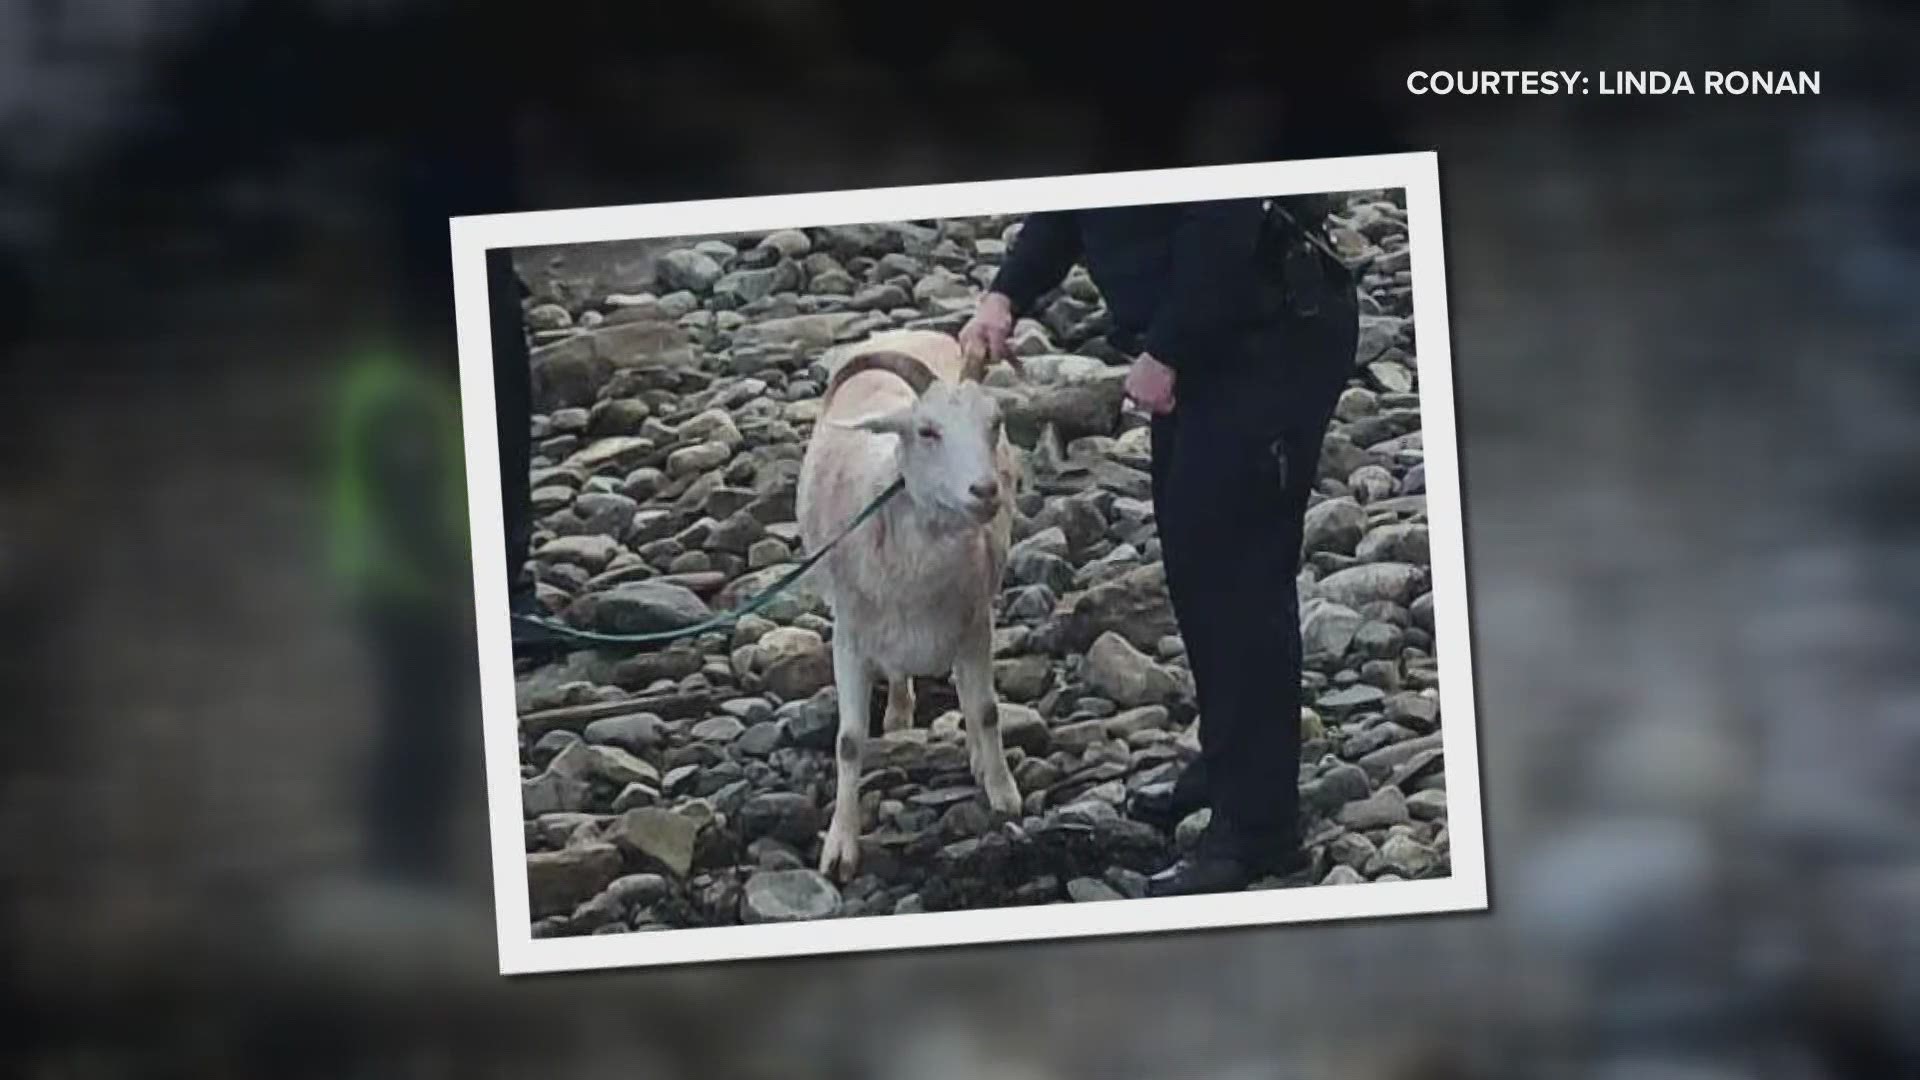 Local resident Jerri Holmes spotted the goat from her window, paddled out in her kayak and was able to assist Belfast Police Officers in saving the goat.